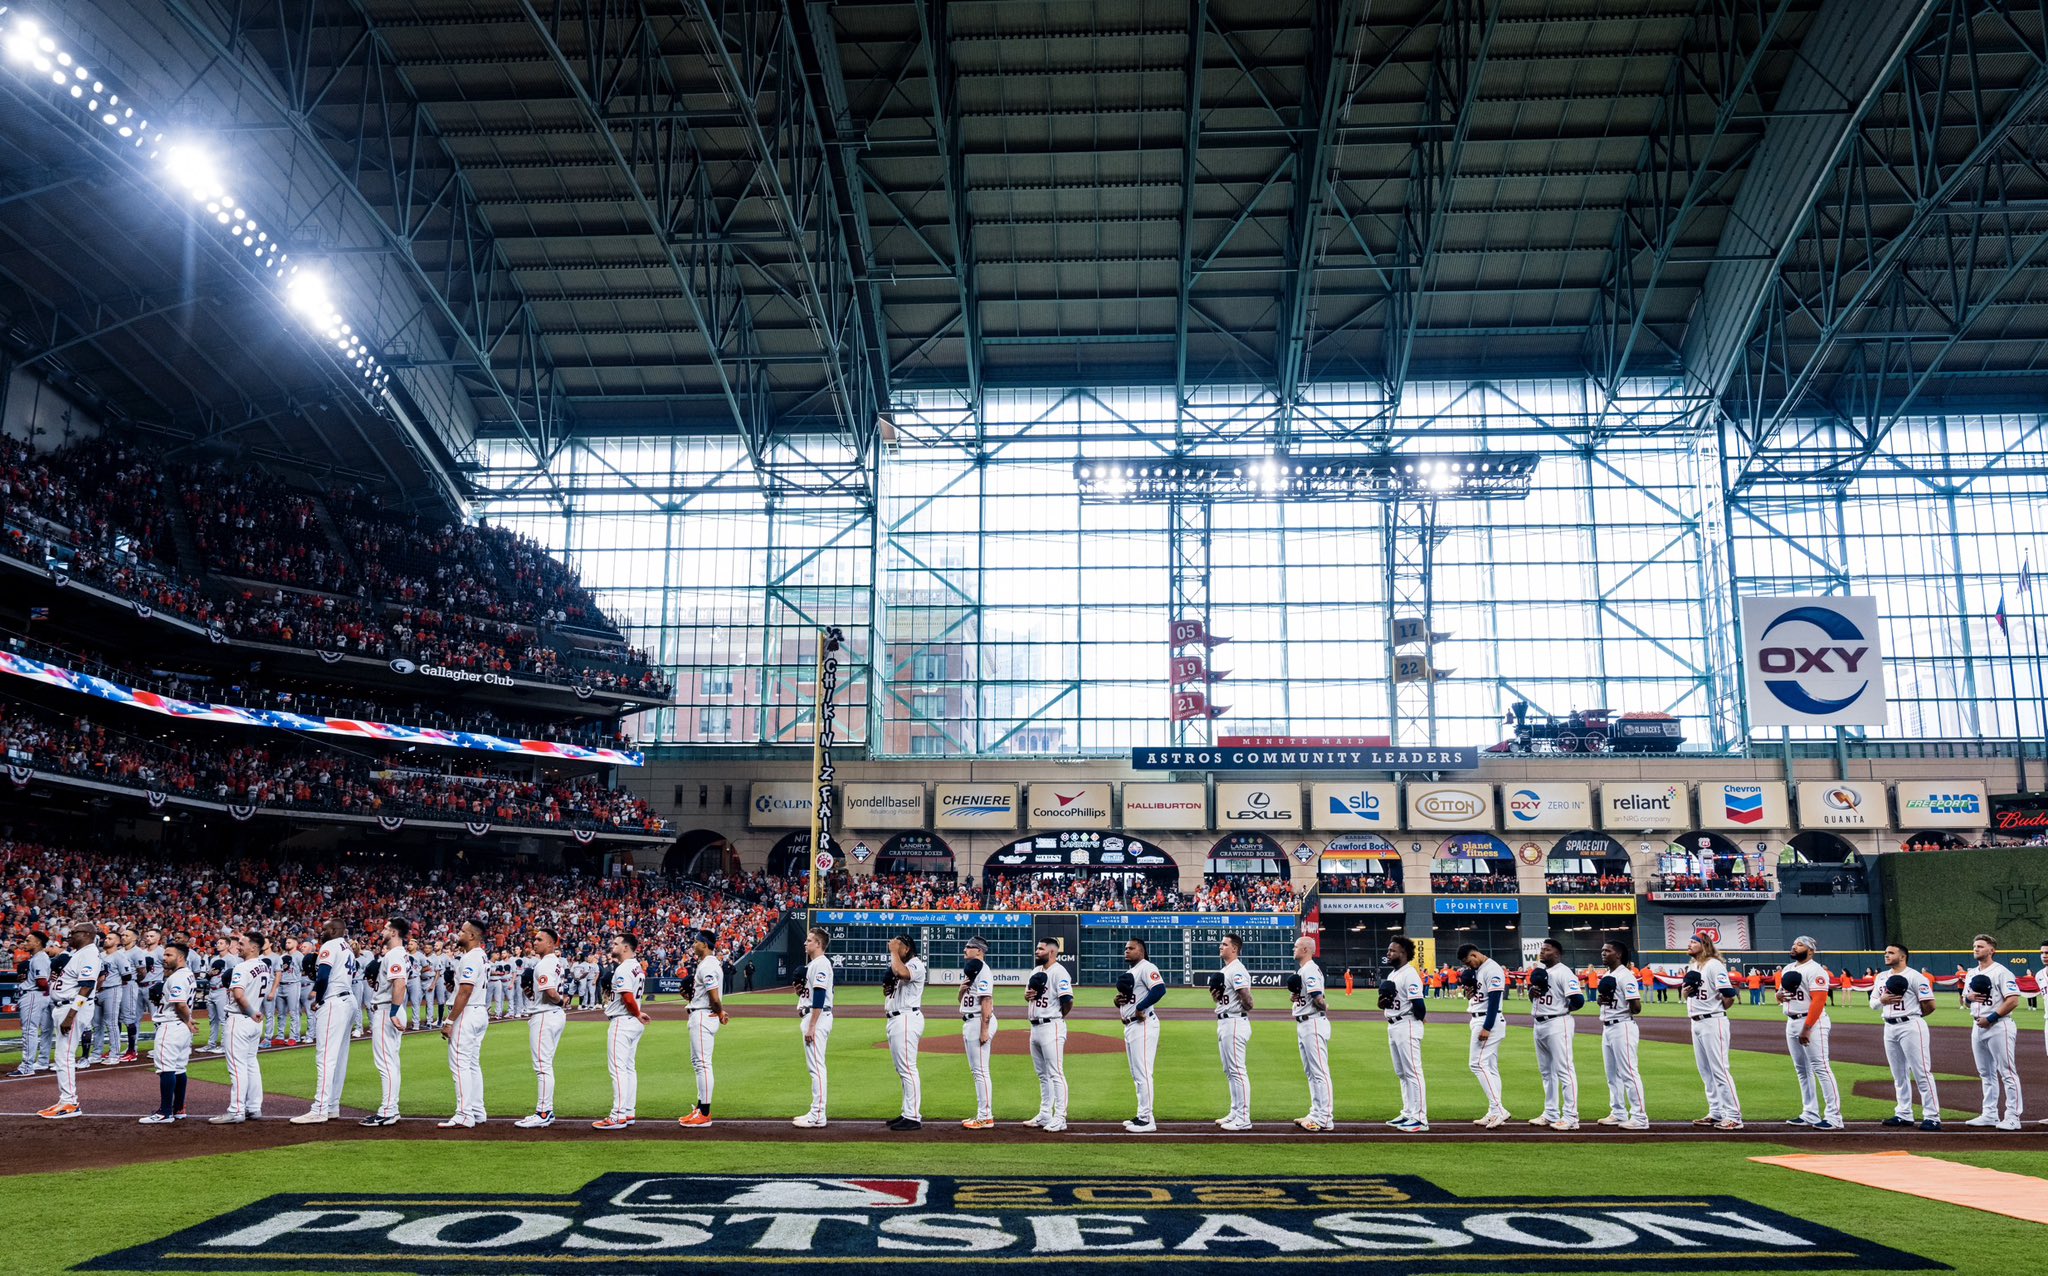 Today at Minute Maid Park